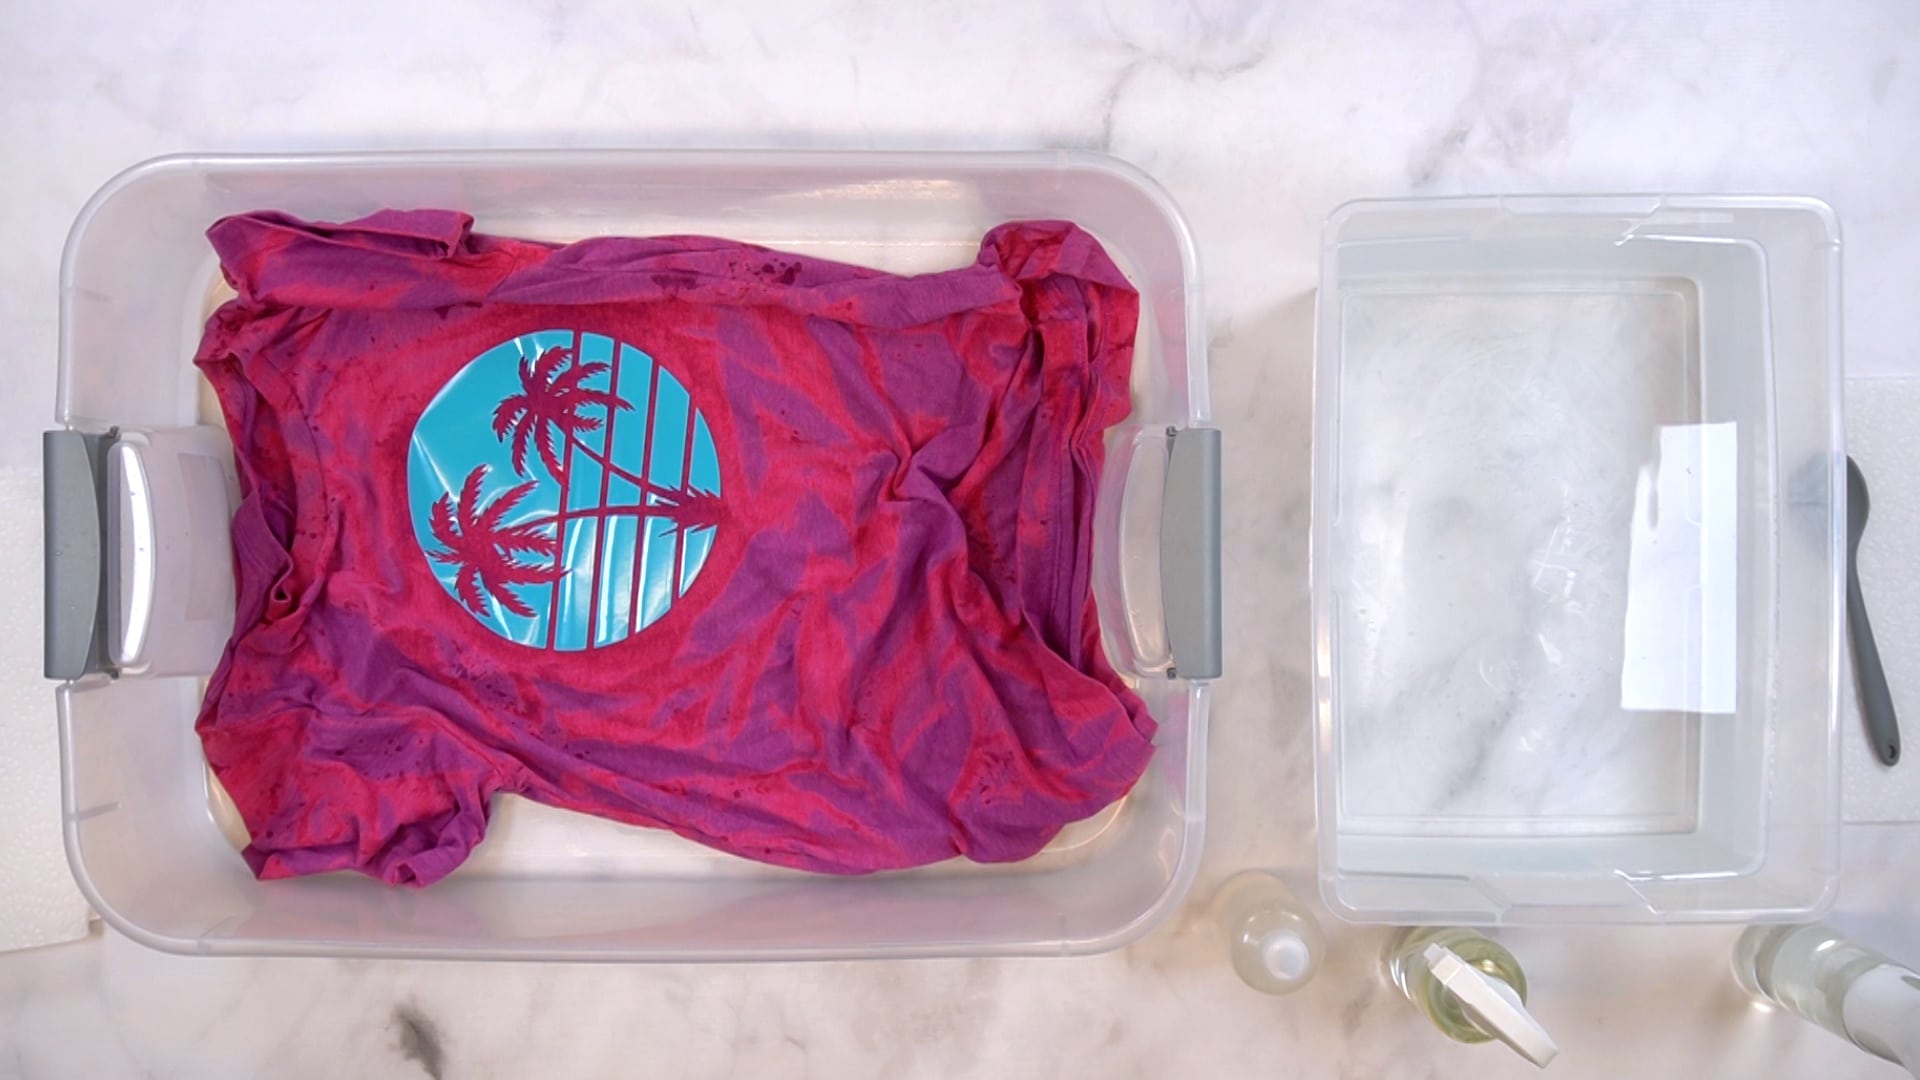 Partially bleached pink and purple shirt with blue vinyl design in a plastic tub